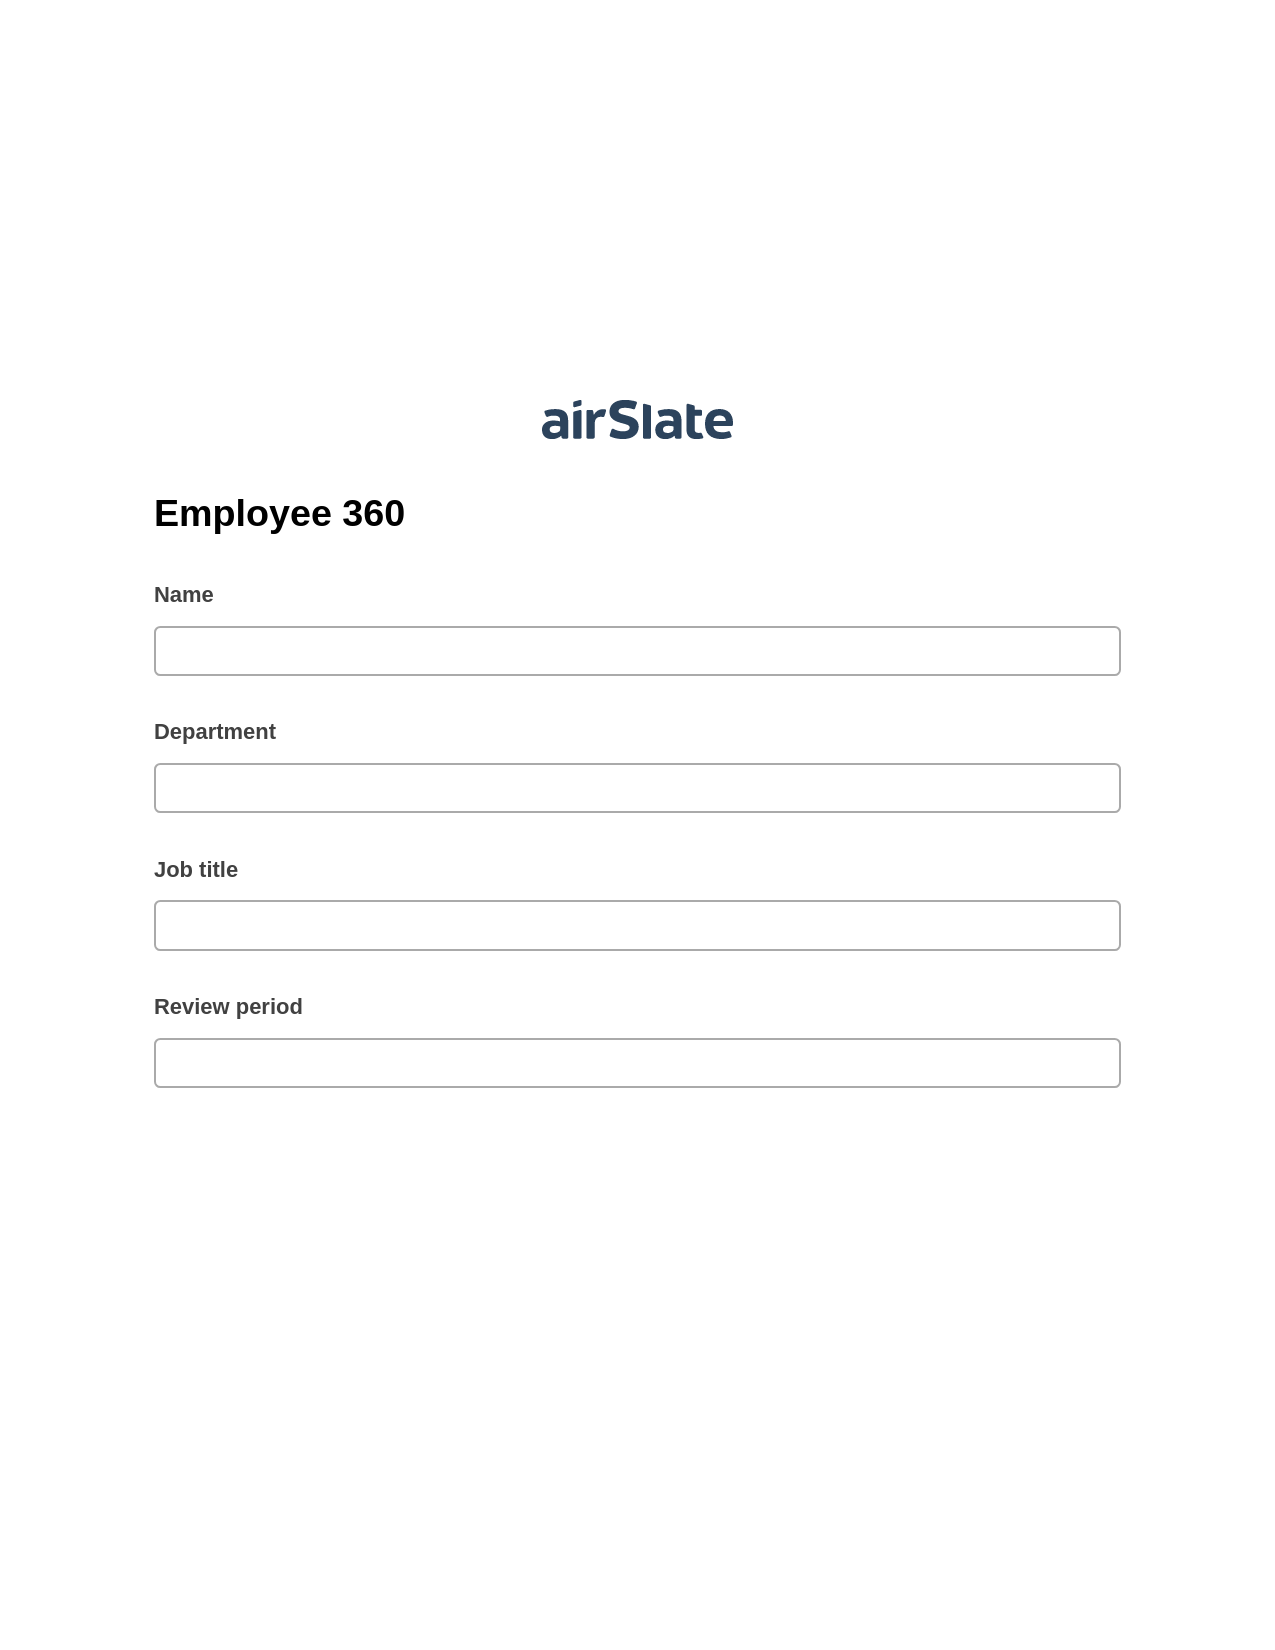 Employee 360 Pre-fill from Excel Spreadsheet Bot, Export to MS Dynamics 365 Bot, Export to WebMerge Bot